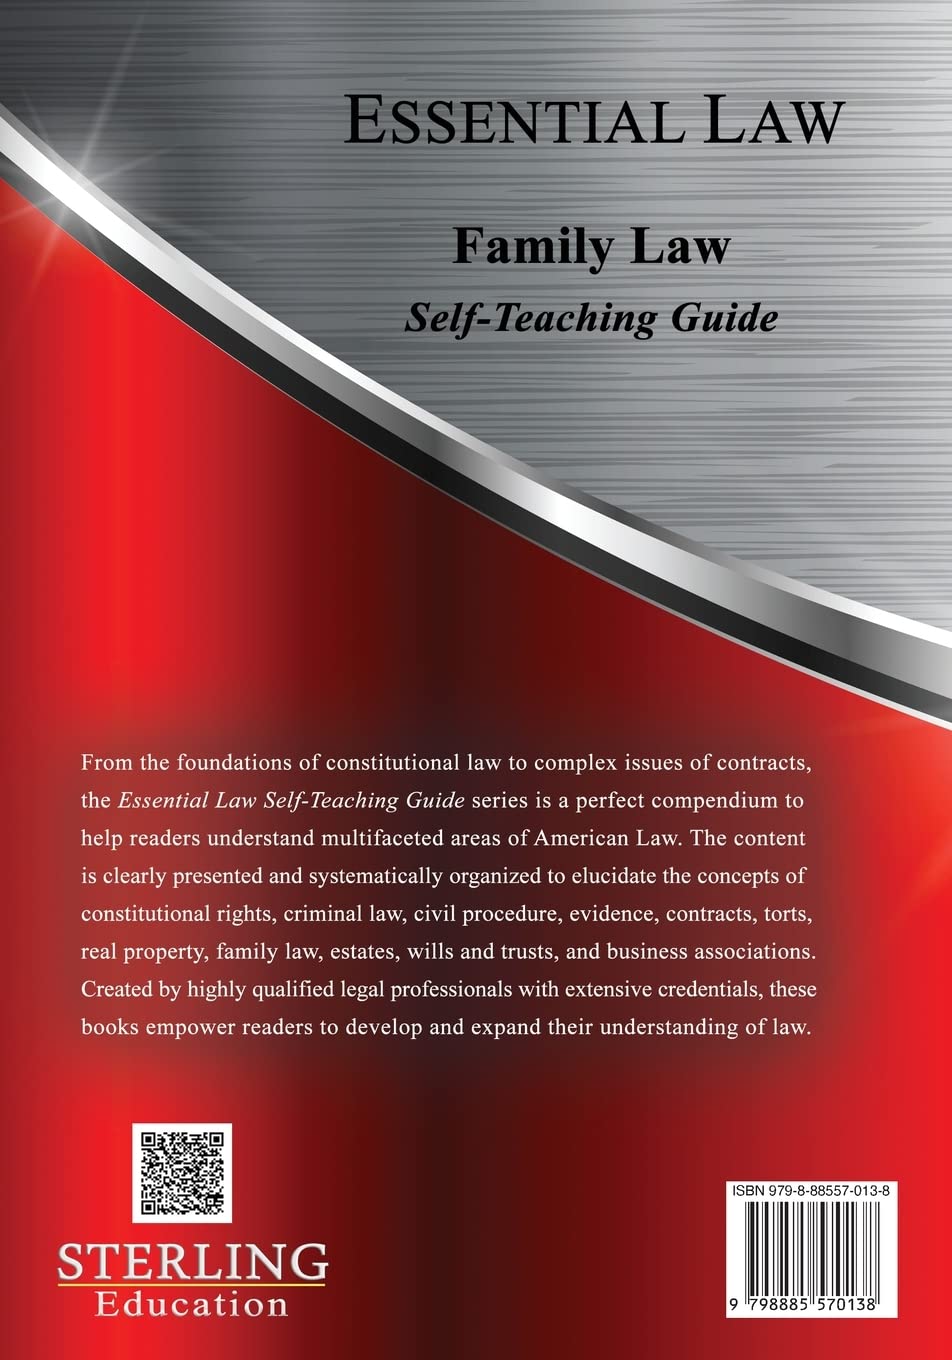 Family Law: Essential Law Self-Teaching Guide (Essential Law Self-Teaching Guides)